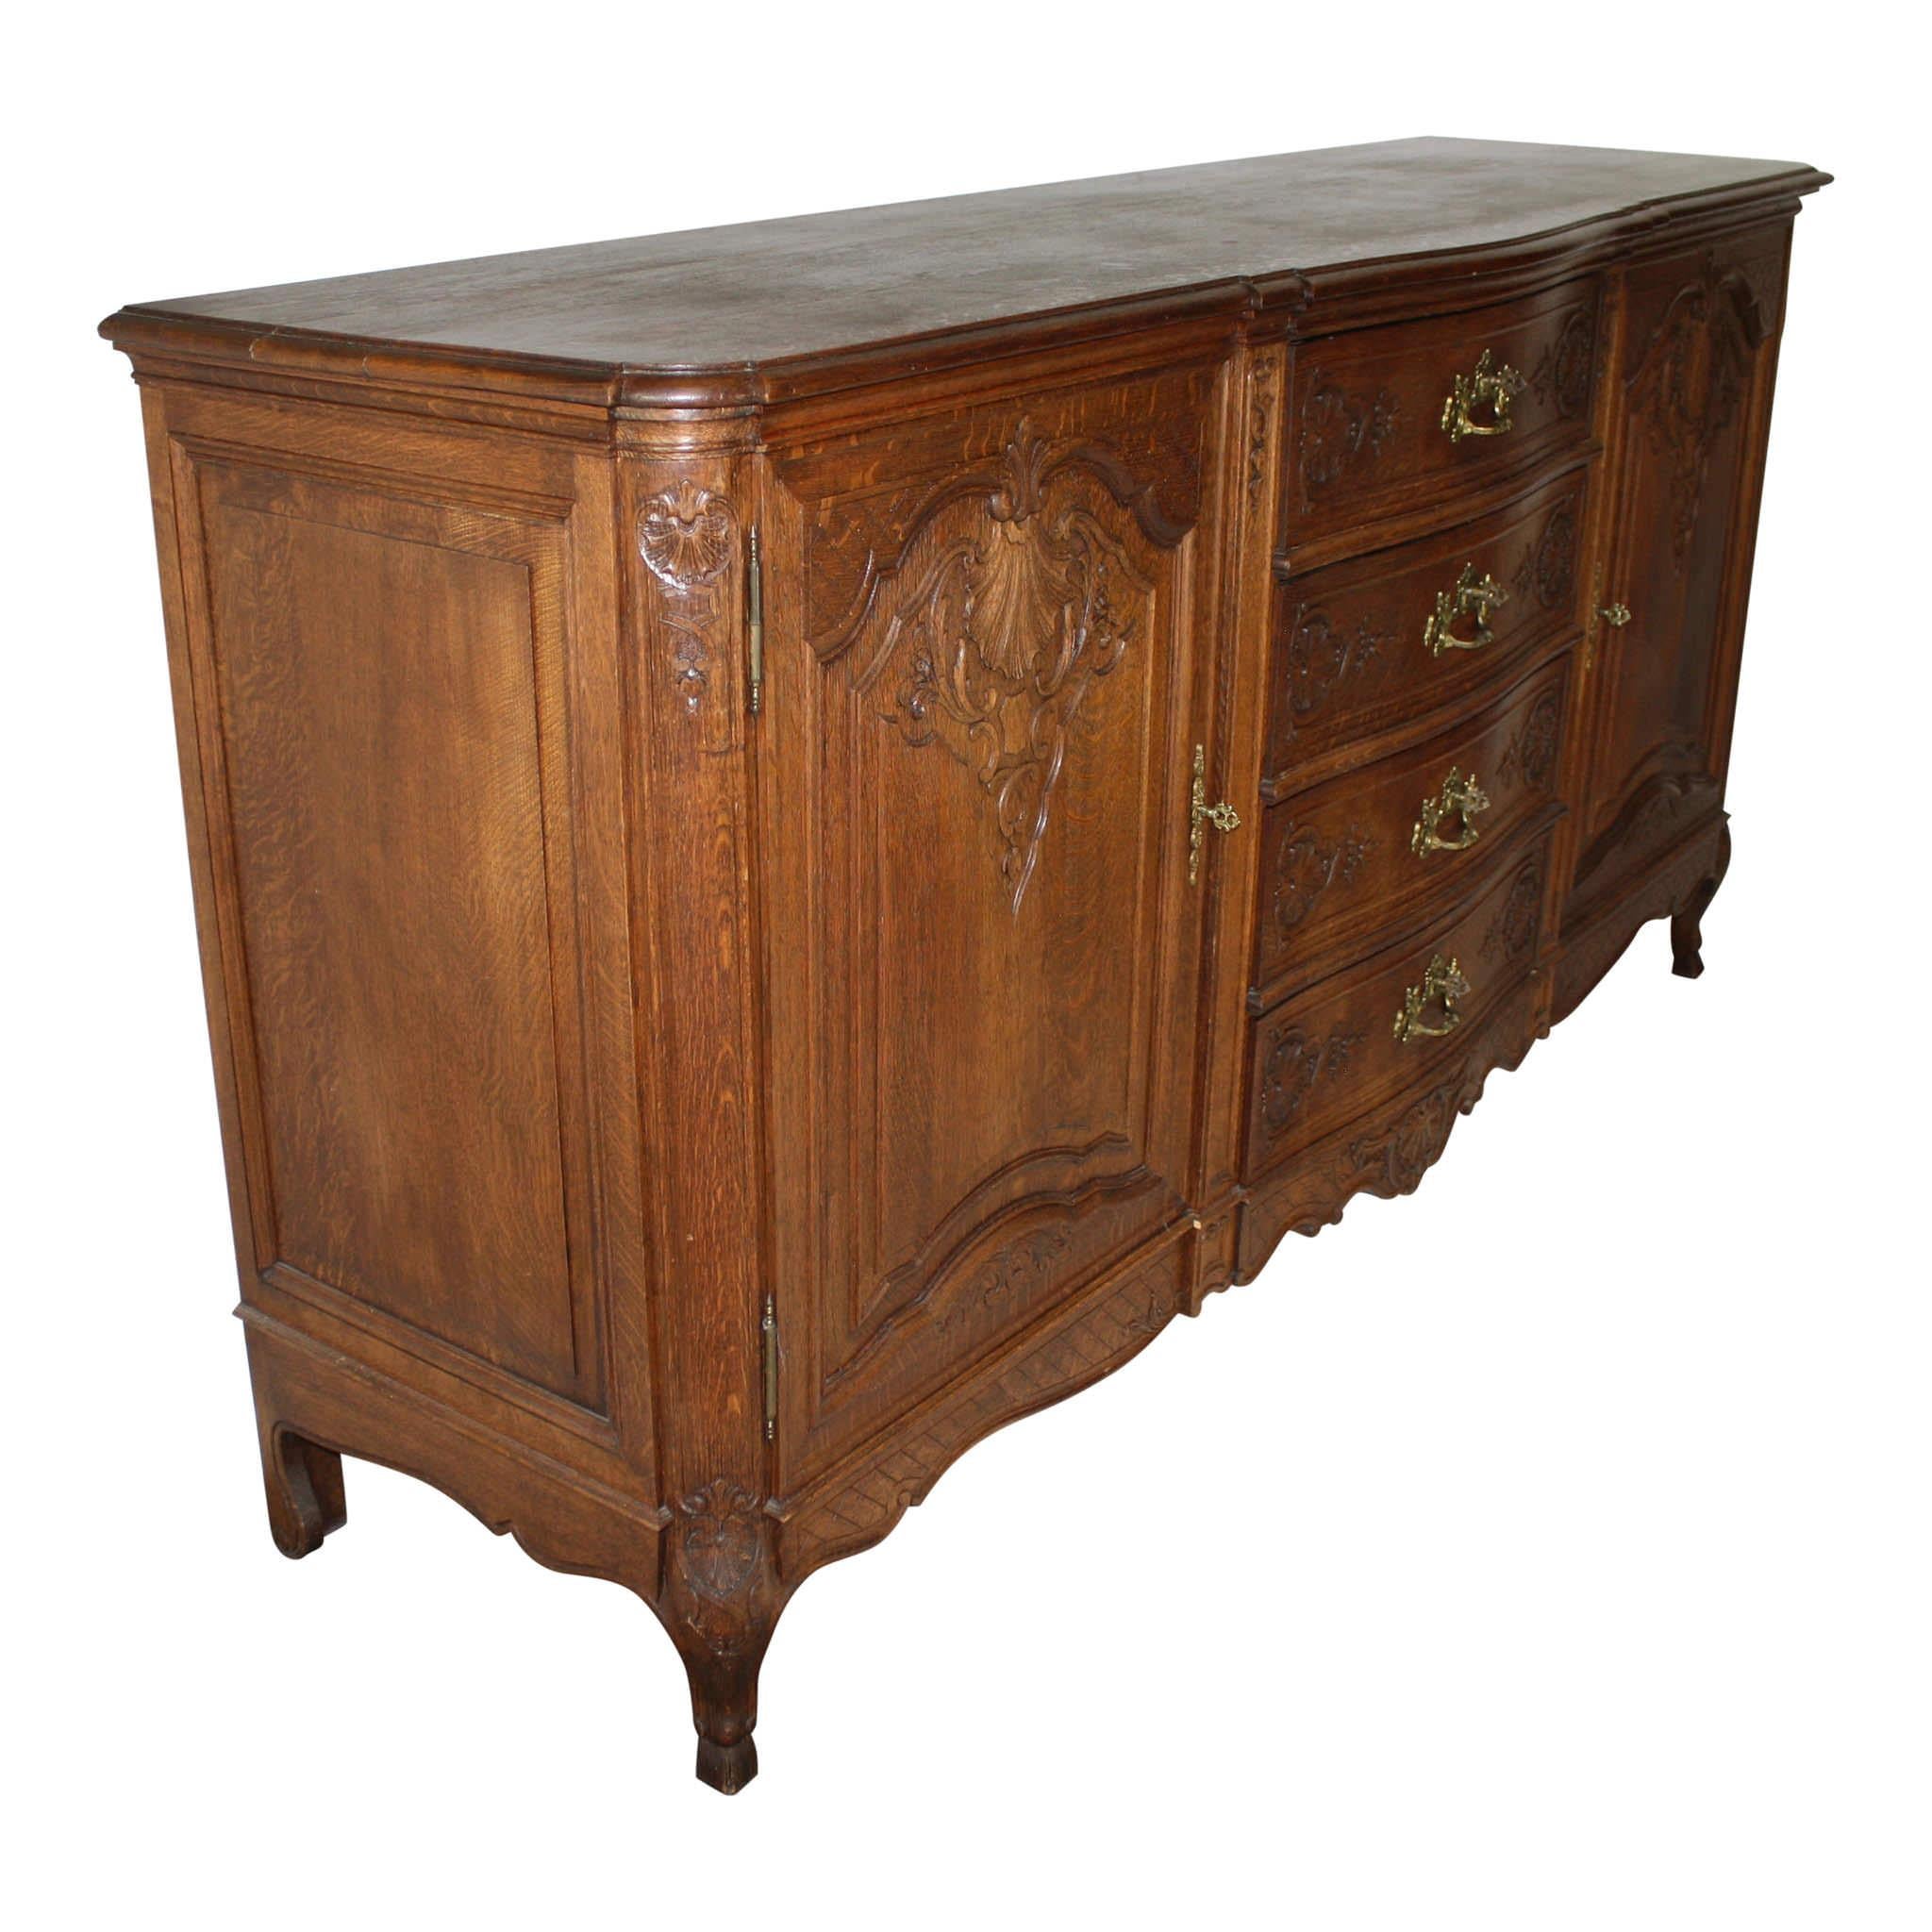 Crafted in Liege, Belgium, this turn of the century sideboard features four drawers flanked by side doors, which open to two adjustable shelves. Each of the drawers and doors has its own key. The drawers have ornamental escutcheons, which serve as